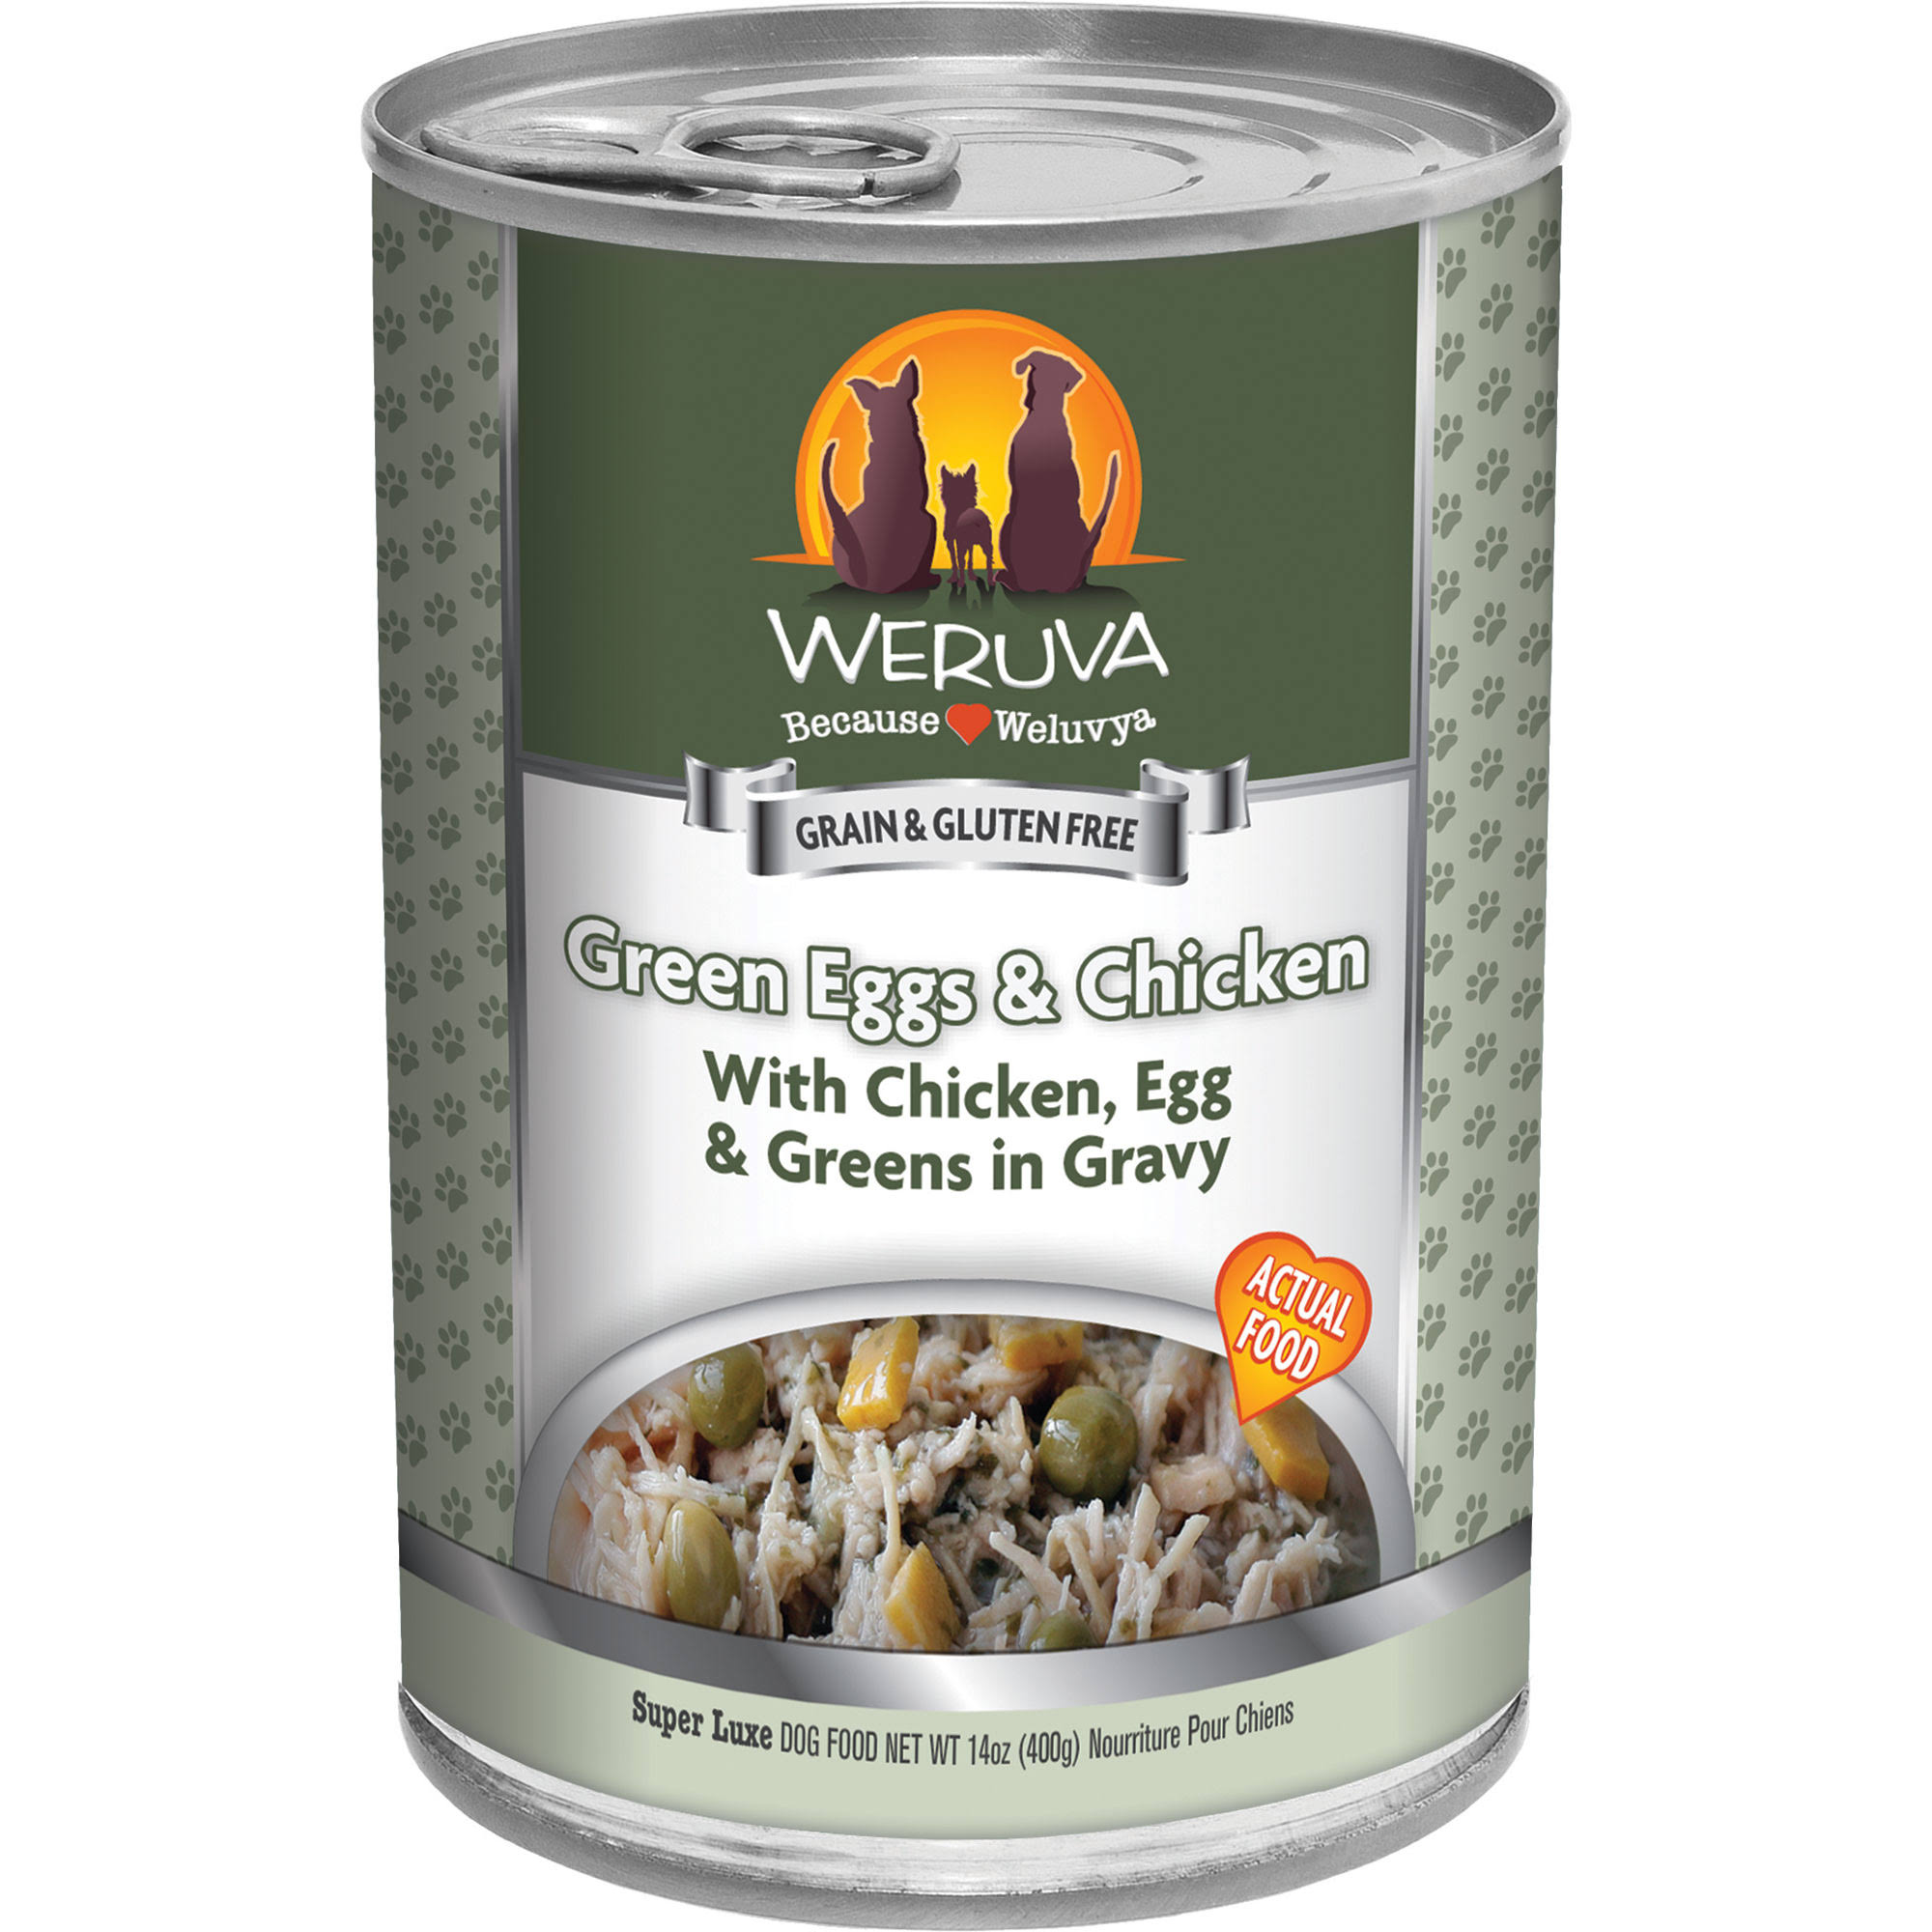 Weruva Canned Dog Food - Grain Free, Green Eggs and Chicken, Adult